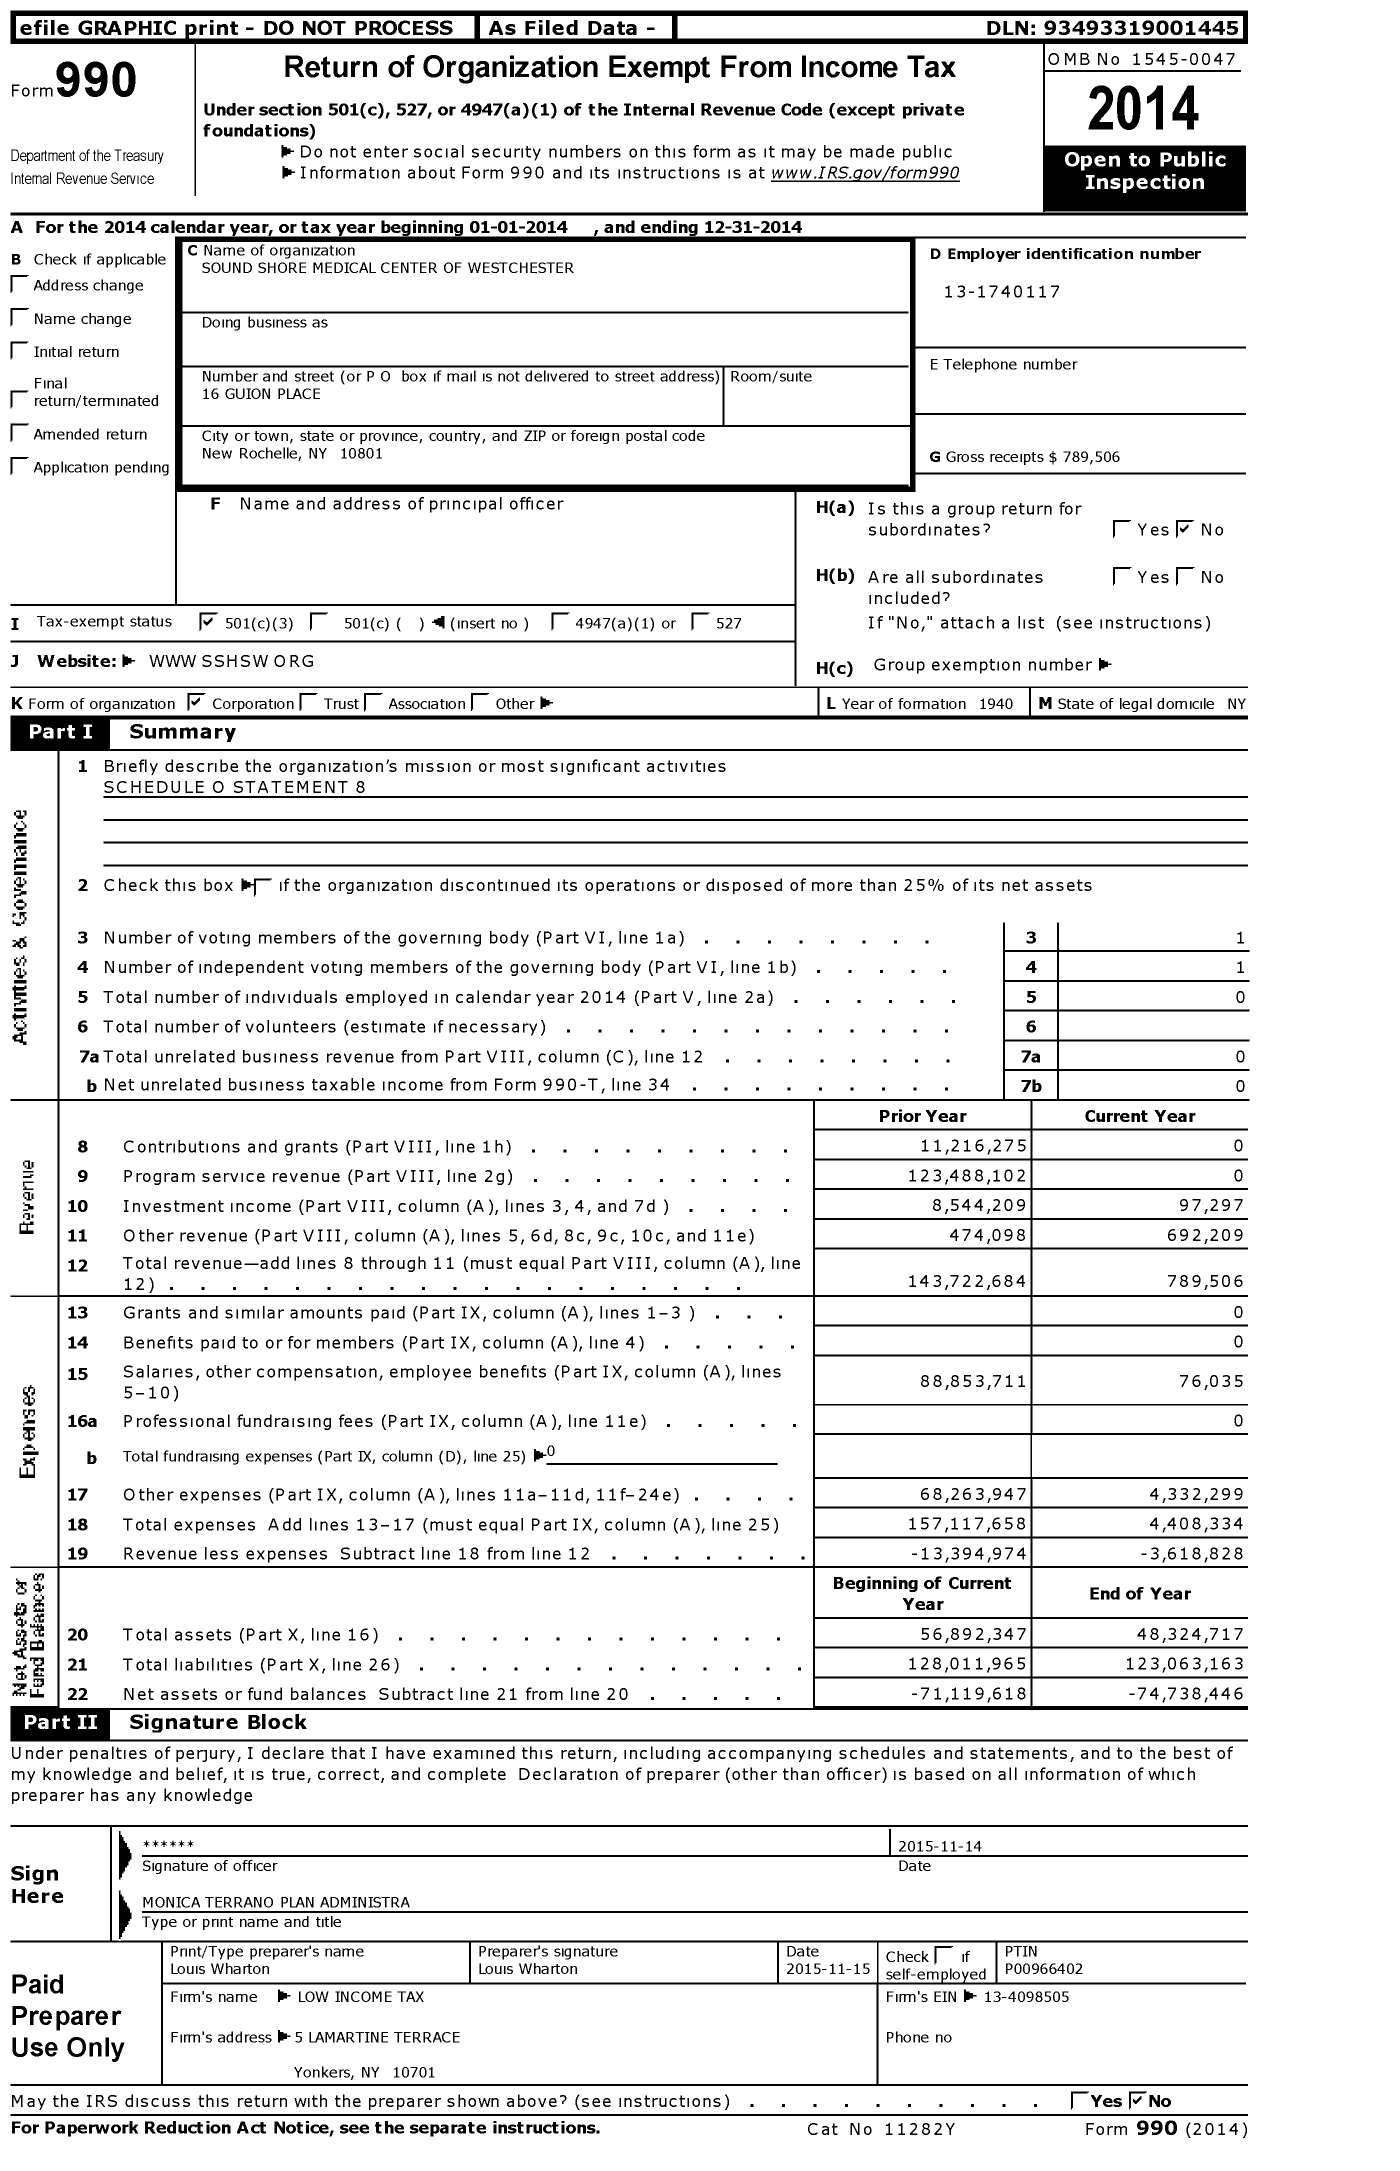 Image of first page of 2014 Form 990 for Sound Shore Medical Center of Westchester